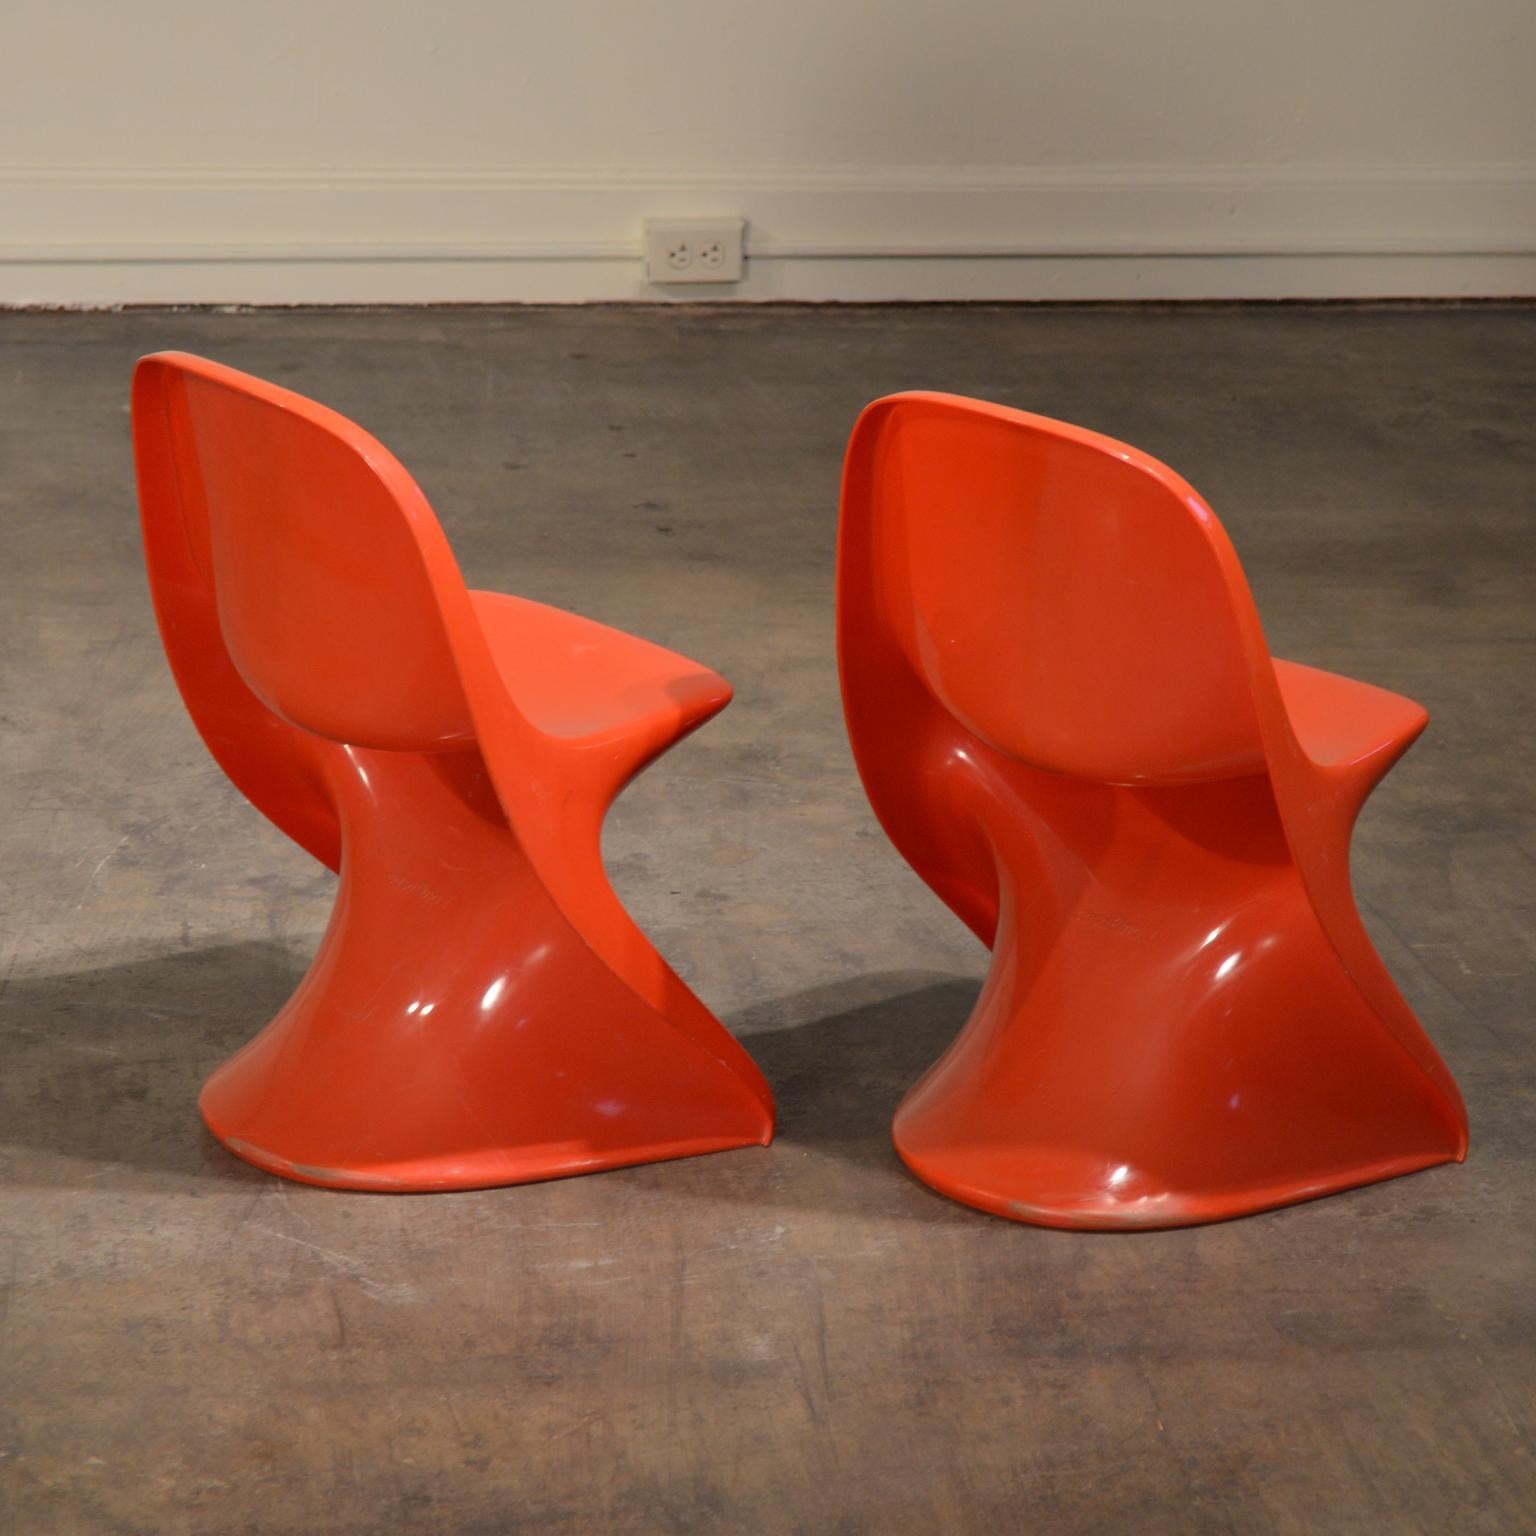 German Alexander Begge Space Age Molded Plastic Child's Chairs by Casalino For Sale